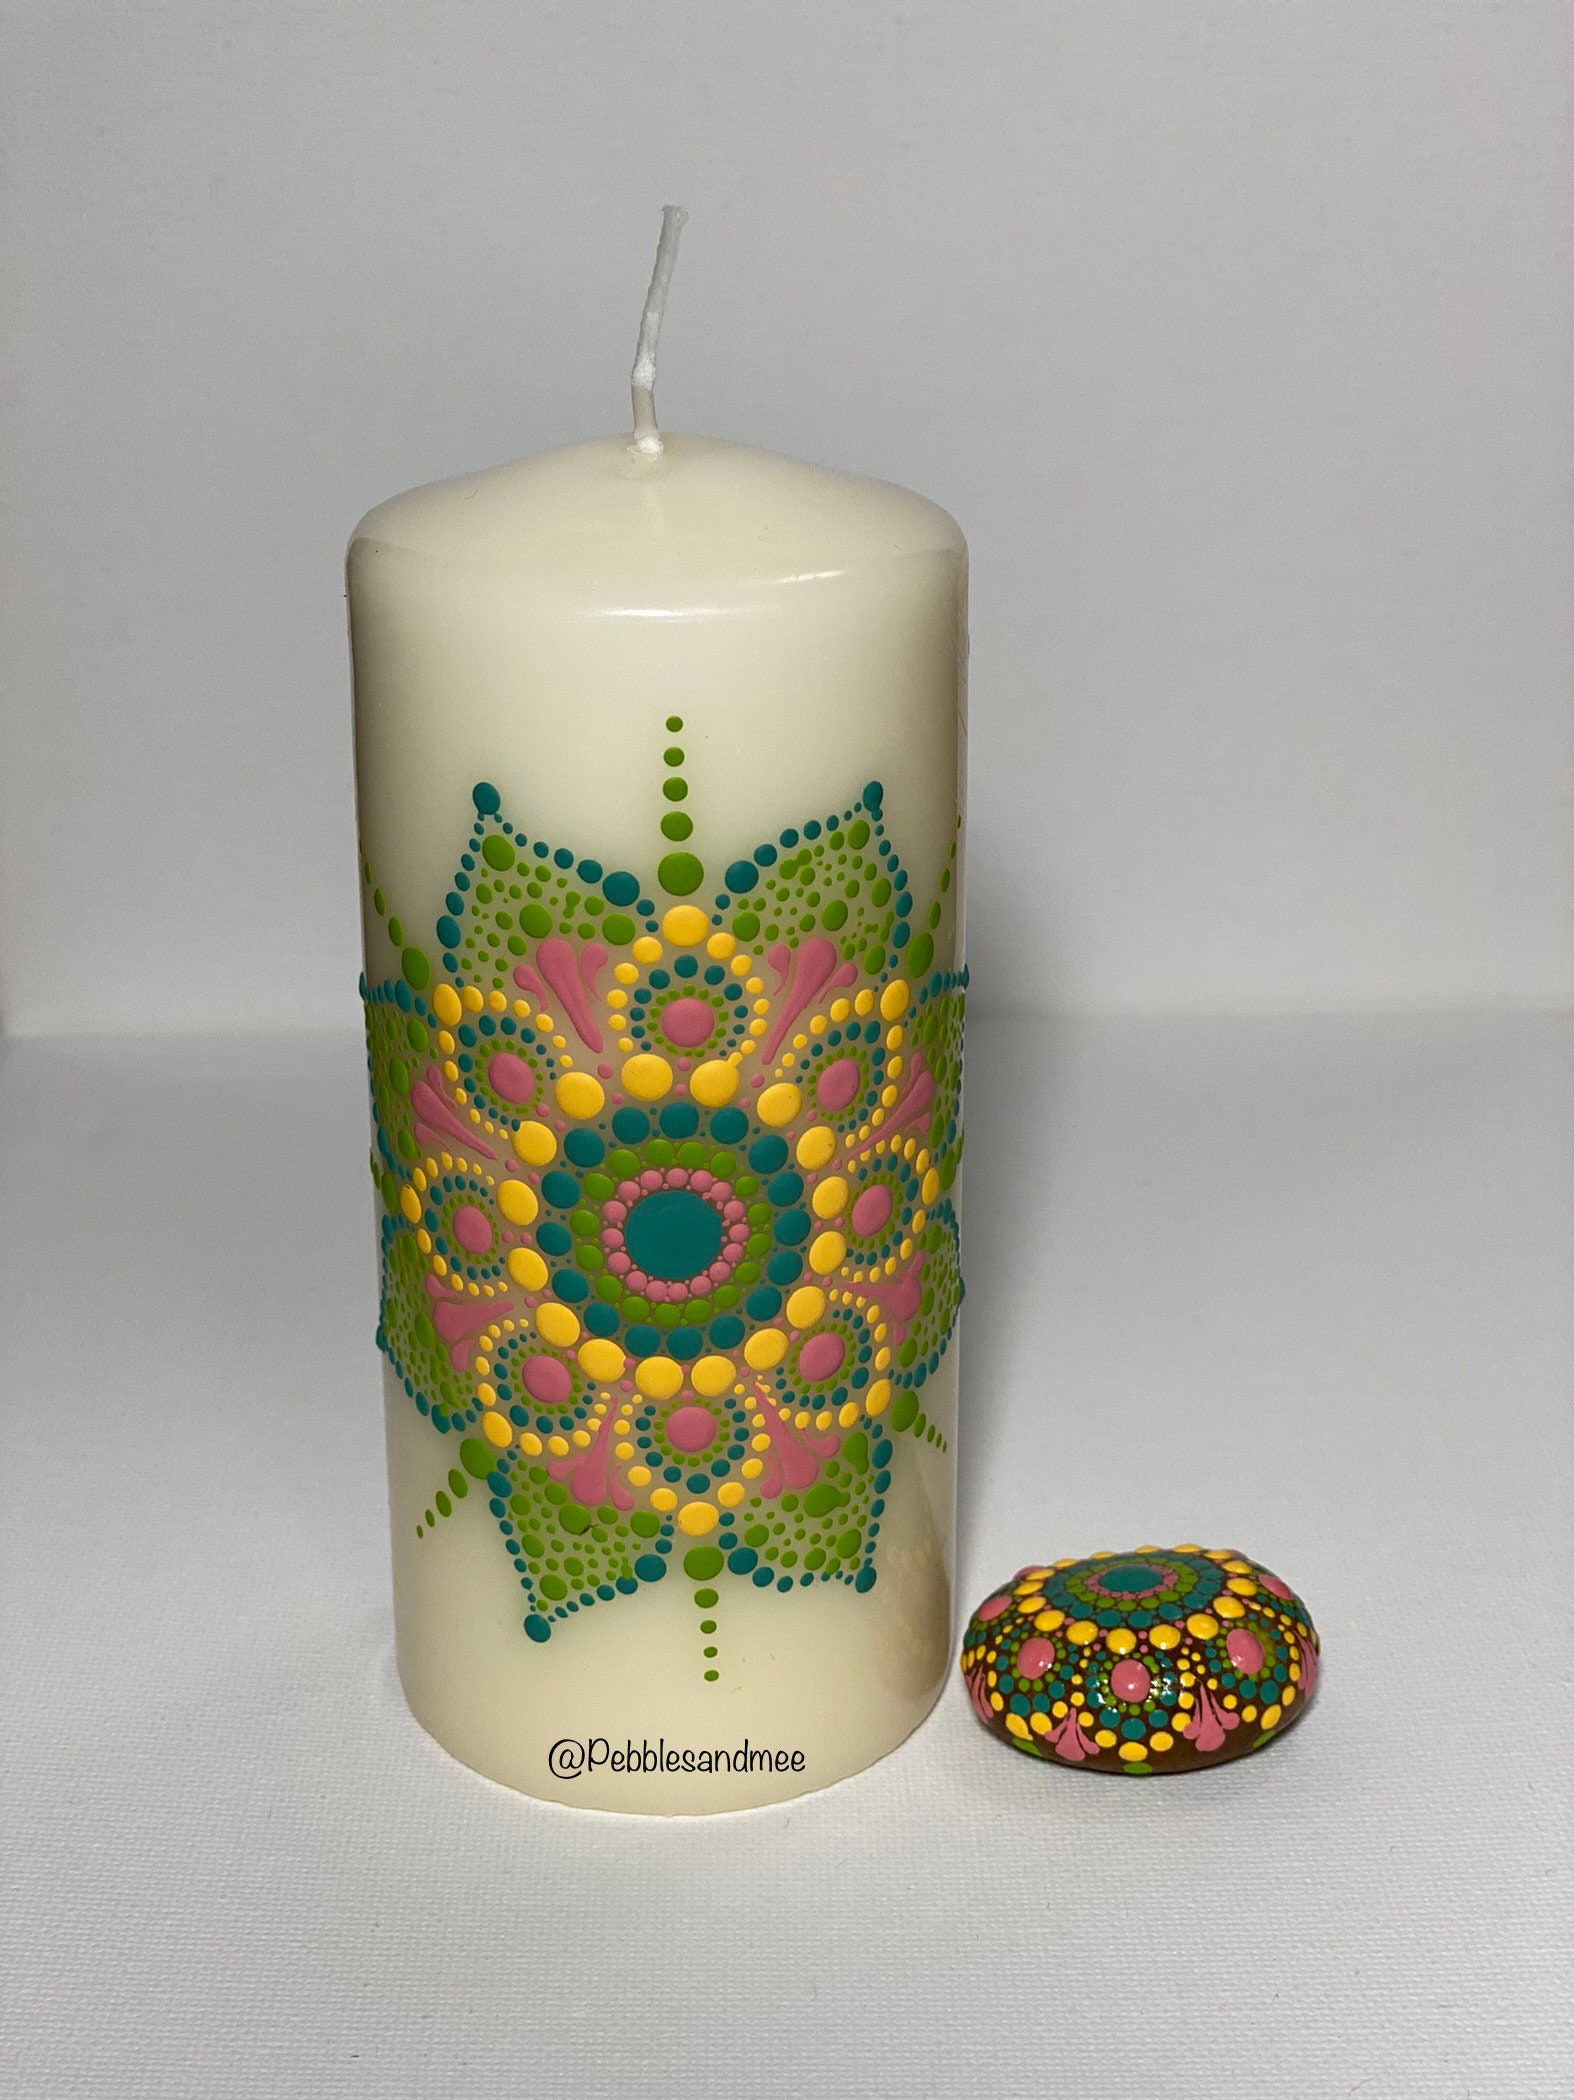 Hand Painted Heart Candle